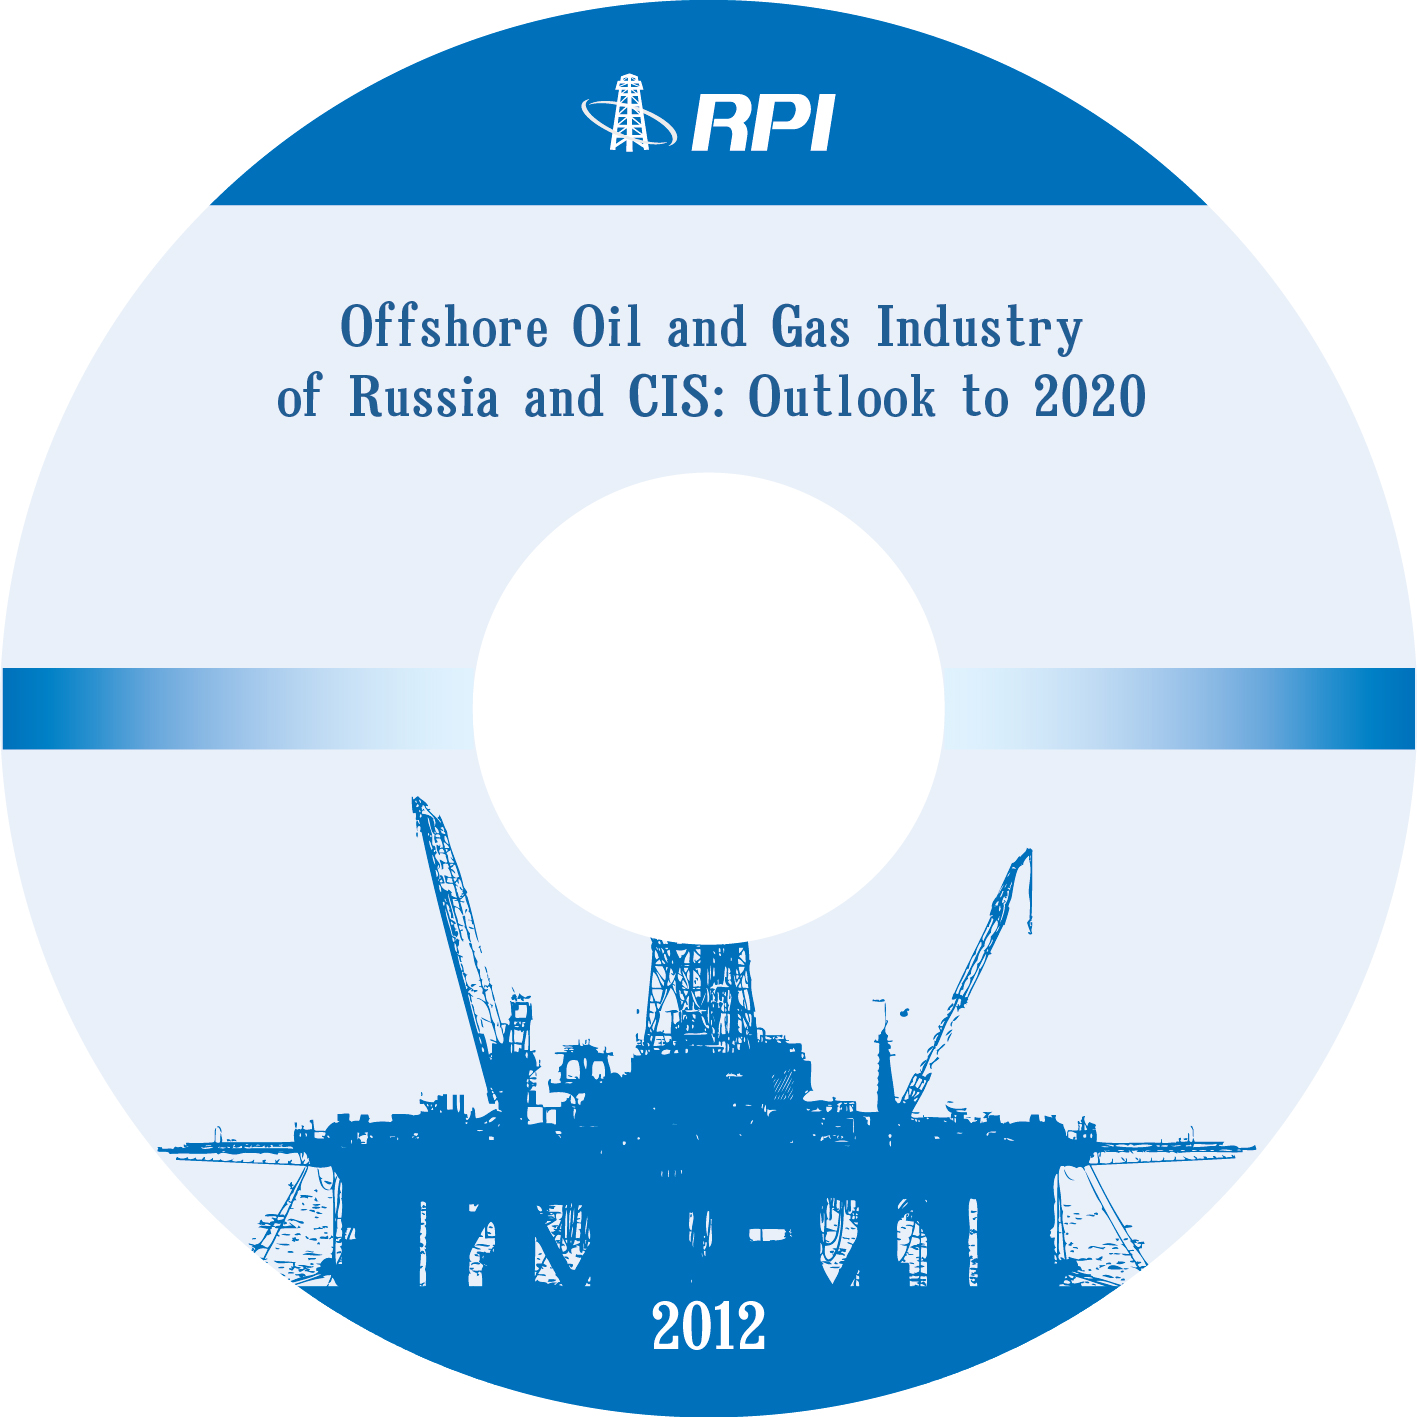 Offshore Oil and Gas Industry of Russia and CIS: Outlook to 2020